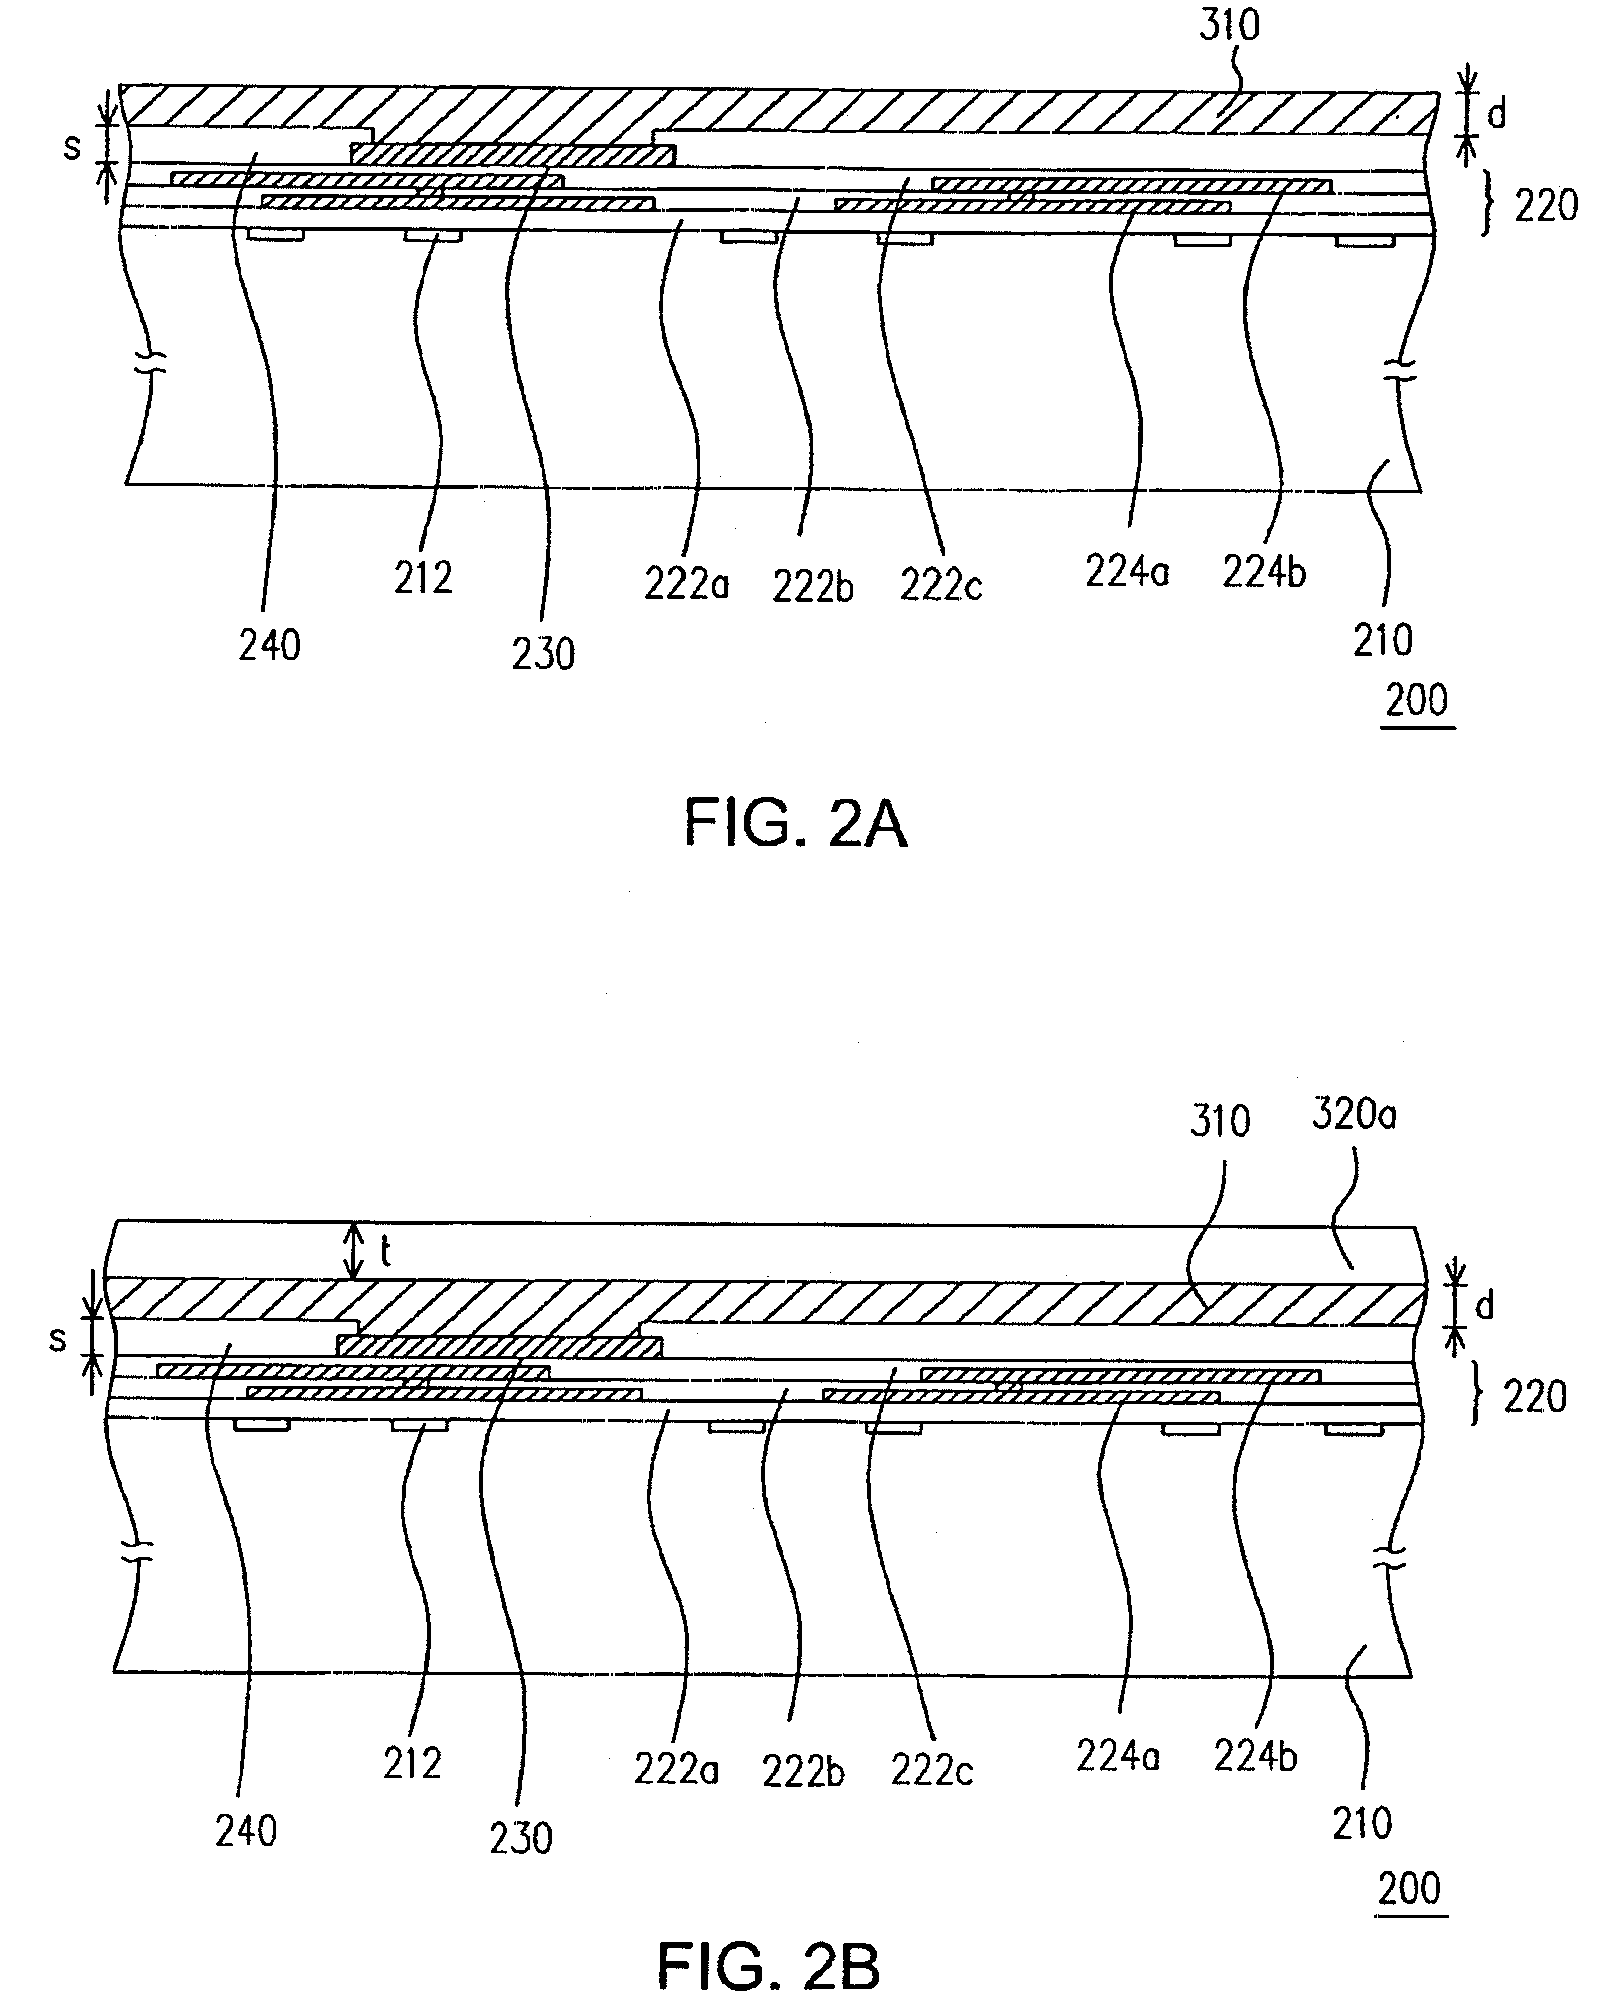 Over-passivation process of forming polymer layer over IC chip